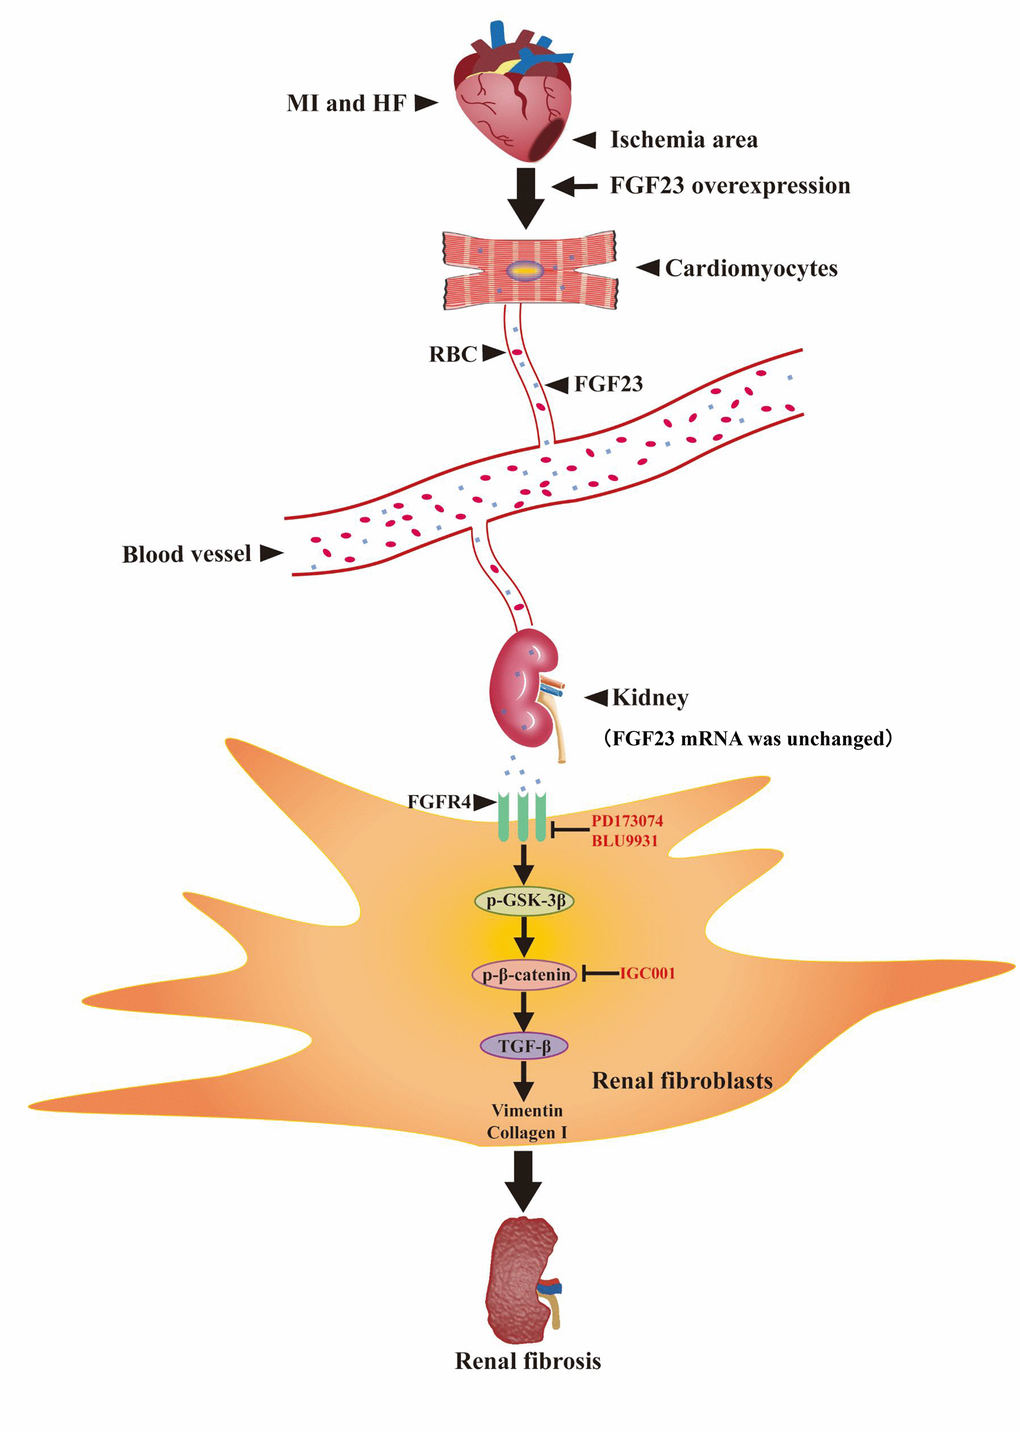 Schematic illustration the contribution of FGF23 induced by post-infarct heart failure to promoting renal fibrosis. Myocardial infarction and heart failure up-regulates FGF23 in cardiomyocytes and increases FGF23 protein level in the kidneys through blood circulation. FGF23 binds FGFR4 in renal fibroblasts and then activates p-GSK3β/p-β-catenin/TGF-β/Vimentin/Collagen I signaling pathway to promote renal fibrosis. Intervention with FGF23 overexpression or FGFR antagonist or β-catenin inhibitor can change the degree of renal fibrosis. MI, myocardial infarction; HF, heart failure; FGF23, fibroblast growth factor 23; RBC, red blood cell; FGFR4, fibroblast growth factor receptor 4; p-GSK3β, phosphorylated glycogen synthase kinase-3 beta; p-β-catenin, phosphorylated beta-catenin; TGF-β, transforming growth factor-beta; PD173074, FGF receptor antagonist; BLU9931: FGFR4 antagonist; IGC001, β-catenin antagonist; ↑, activation; Т, inhibition.